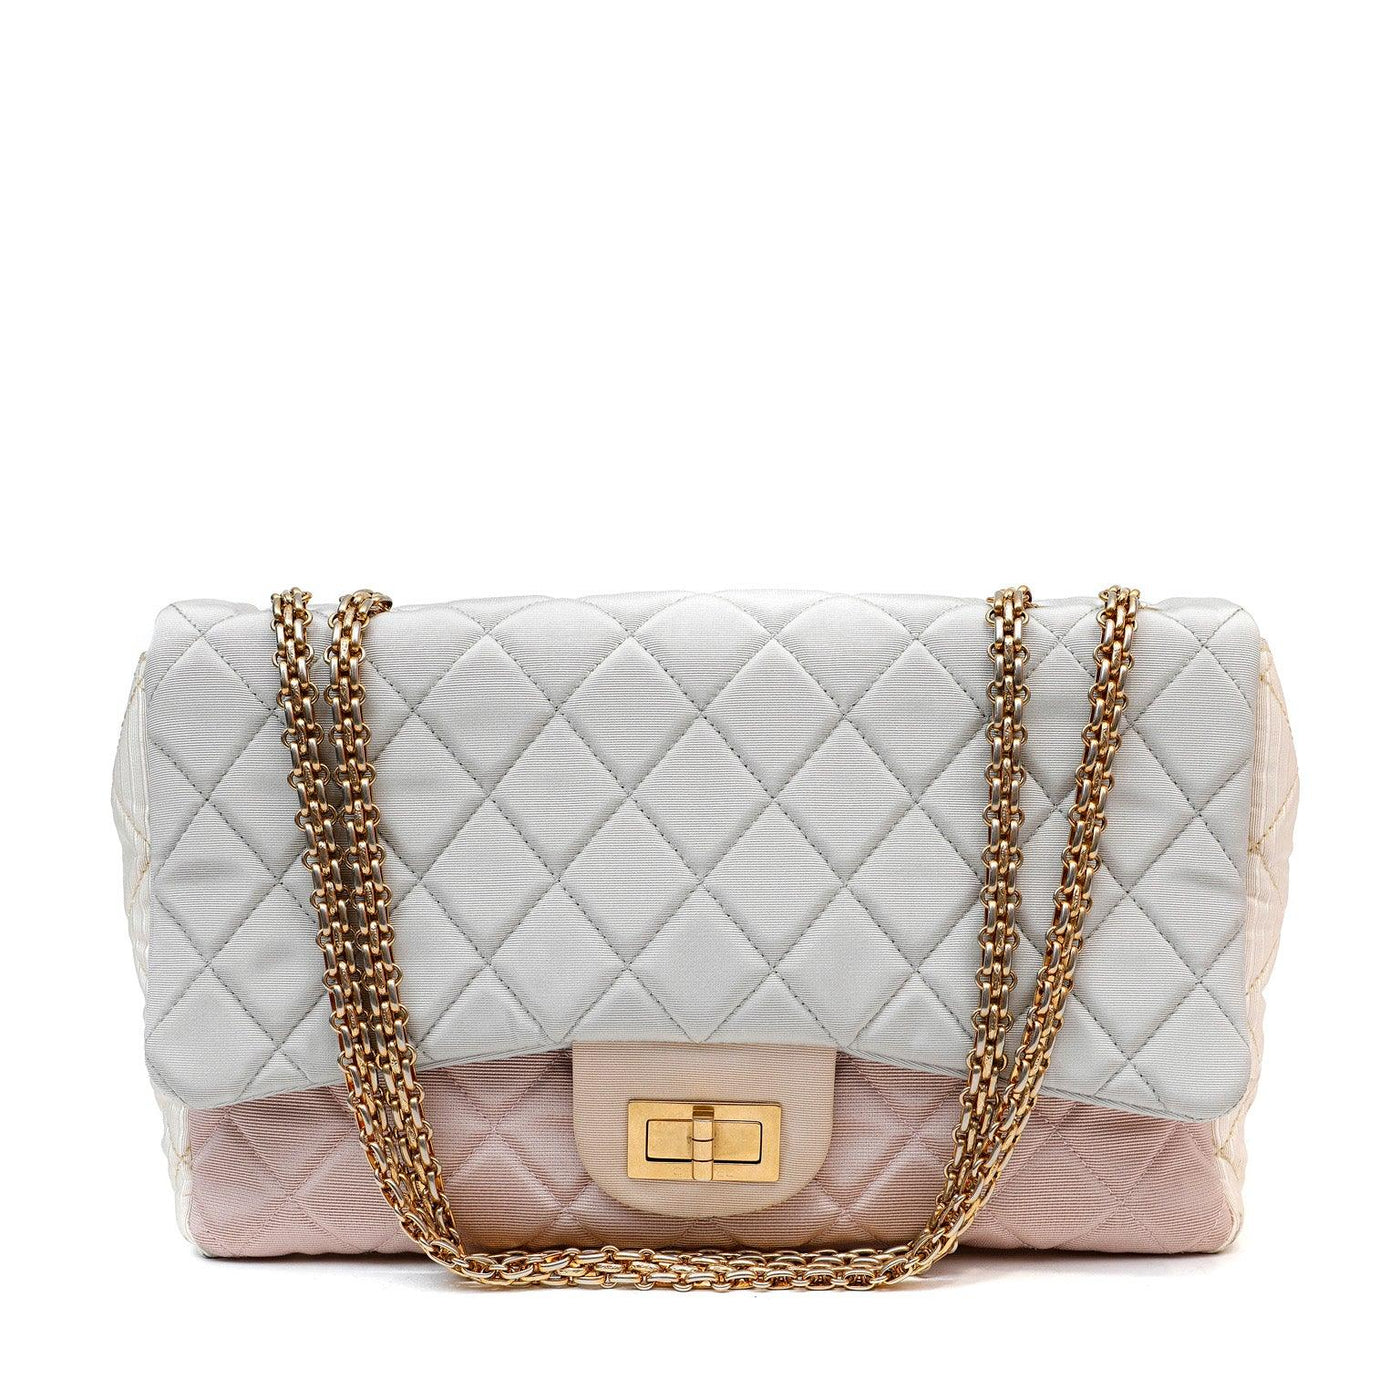 Chanel Tricolor Fabric Reissue Flap Bag - Only Authentics